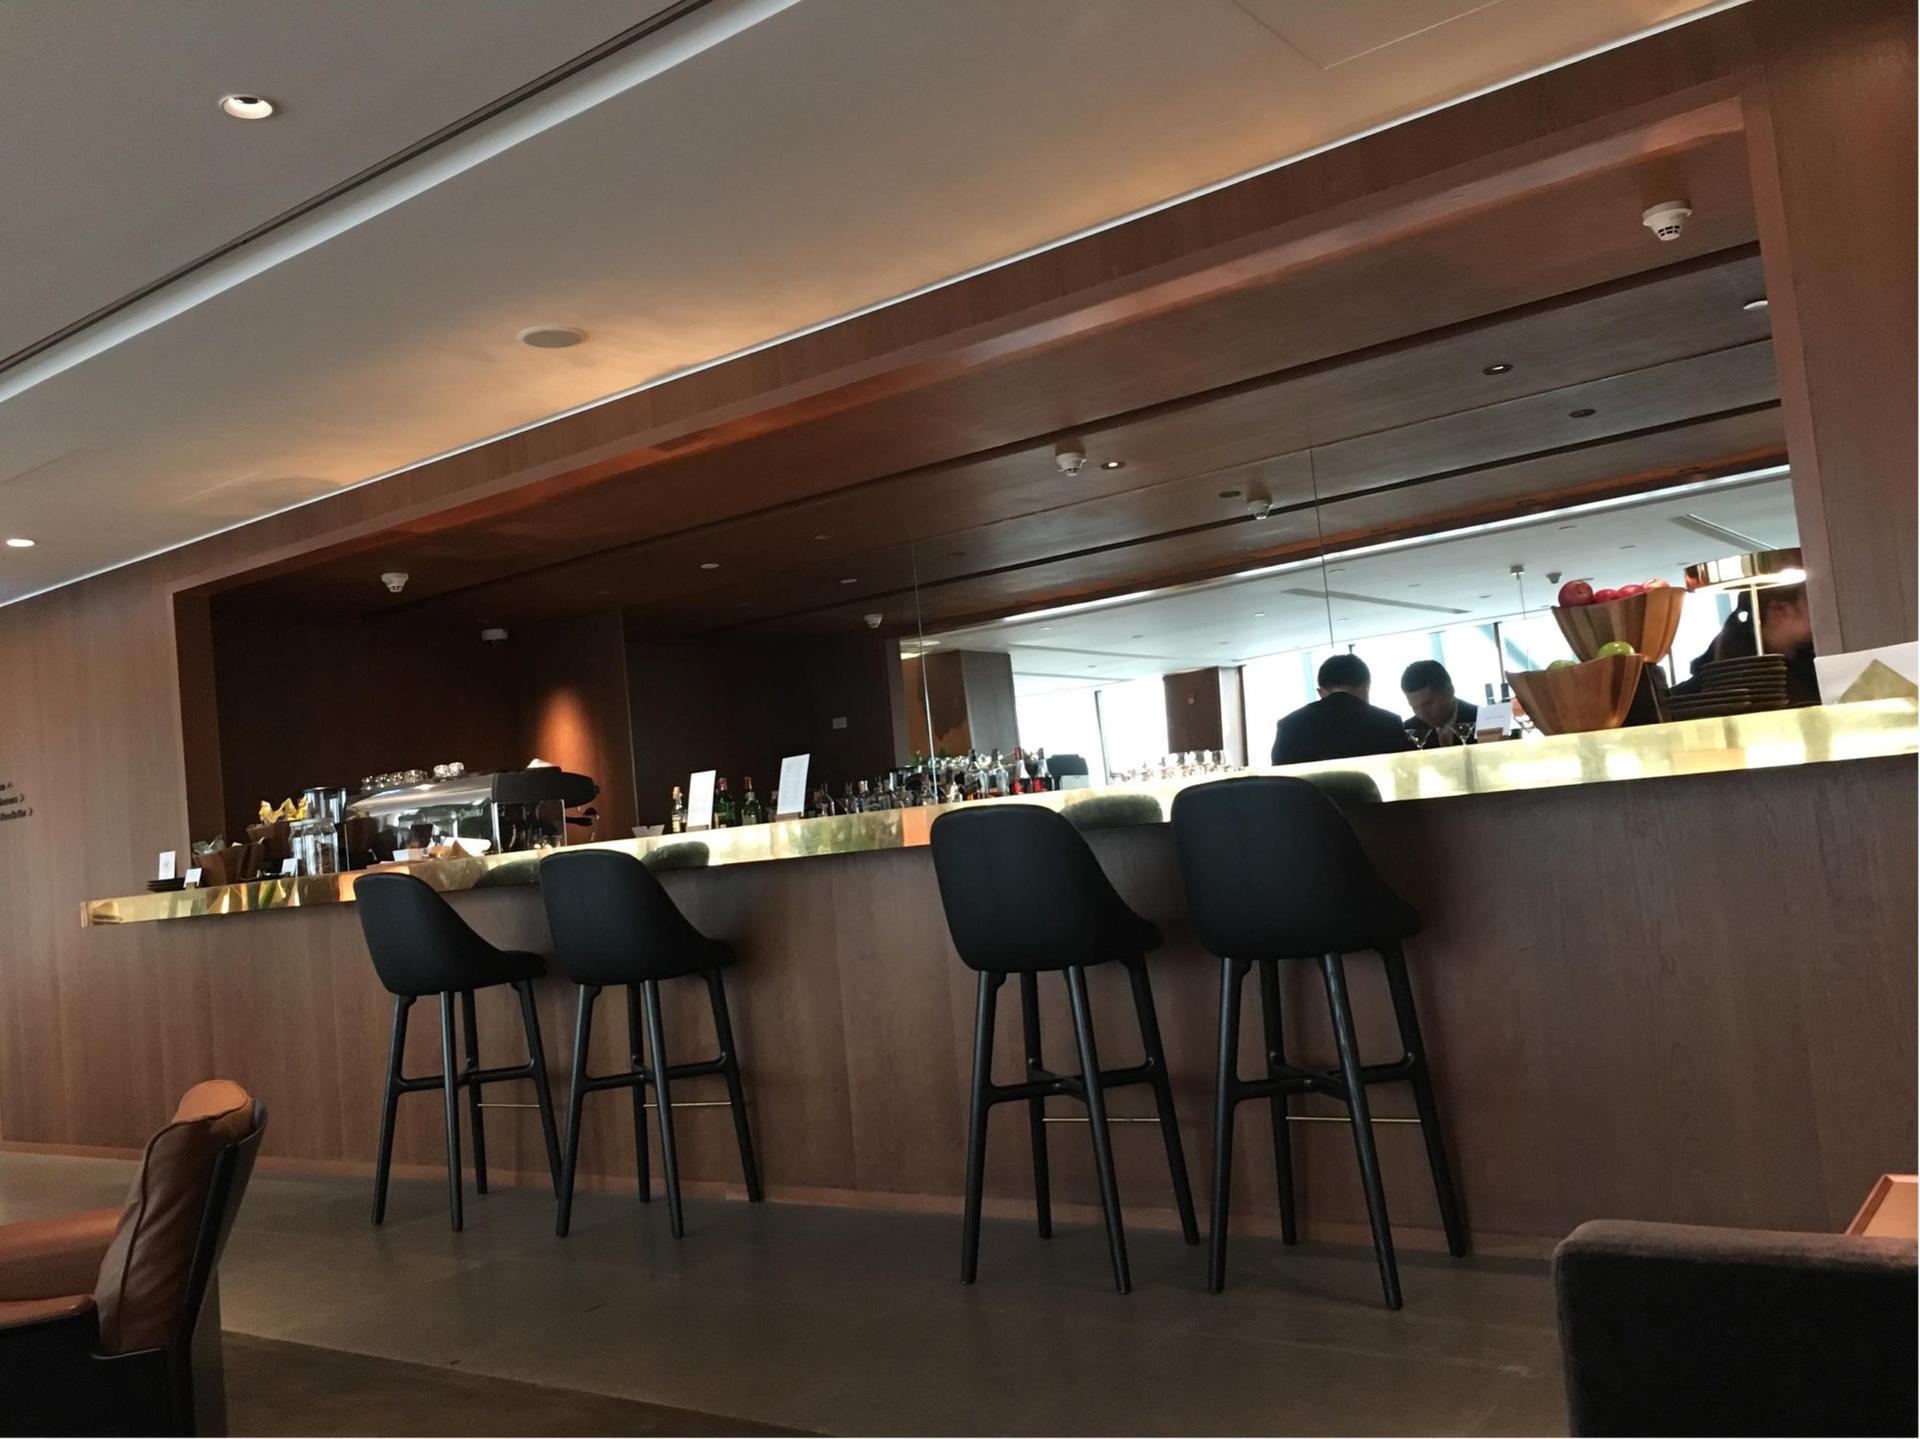 Cathay Pacific First and Business Class Lounge image 11 of 69